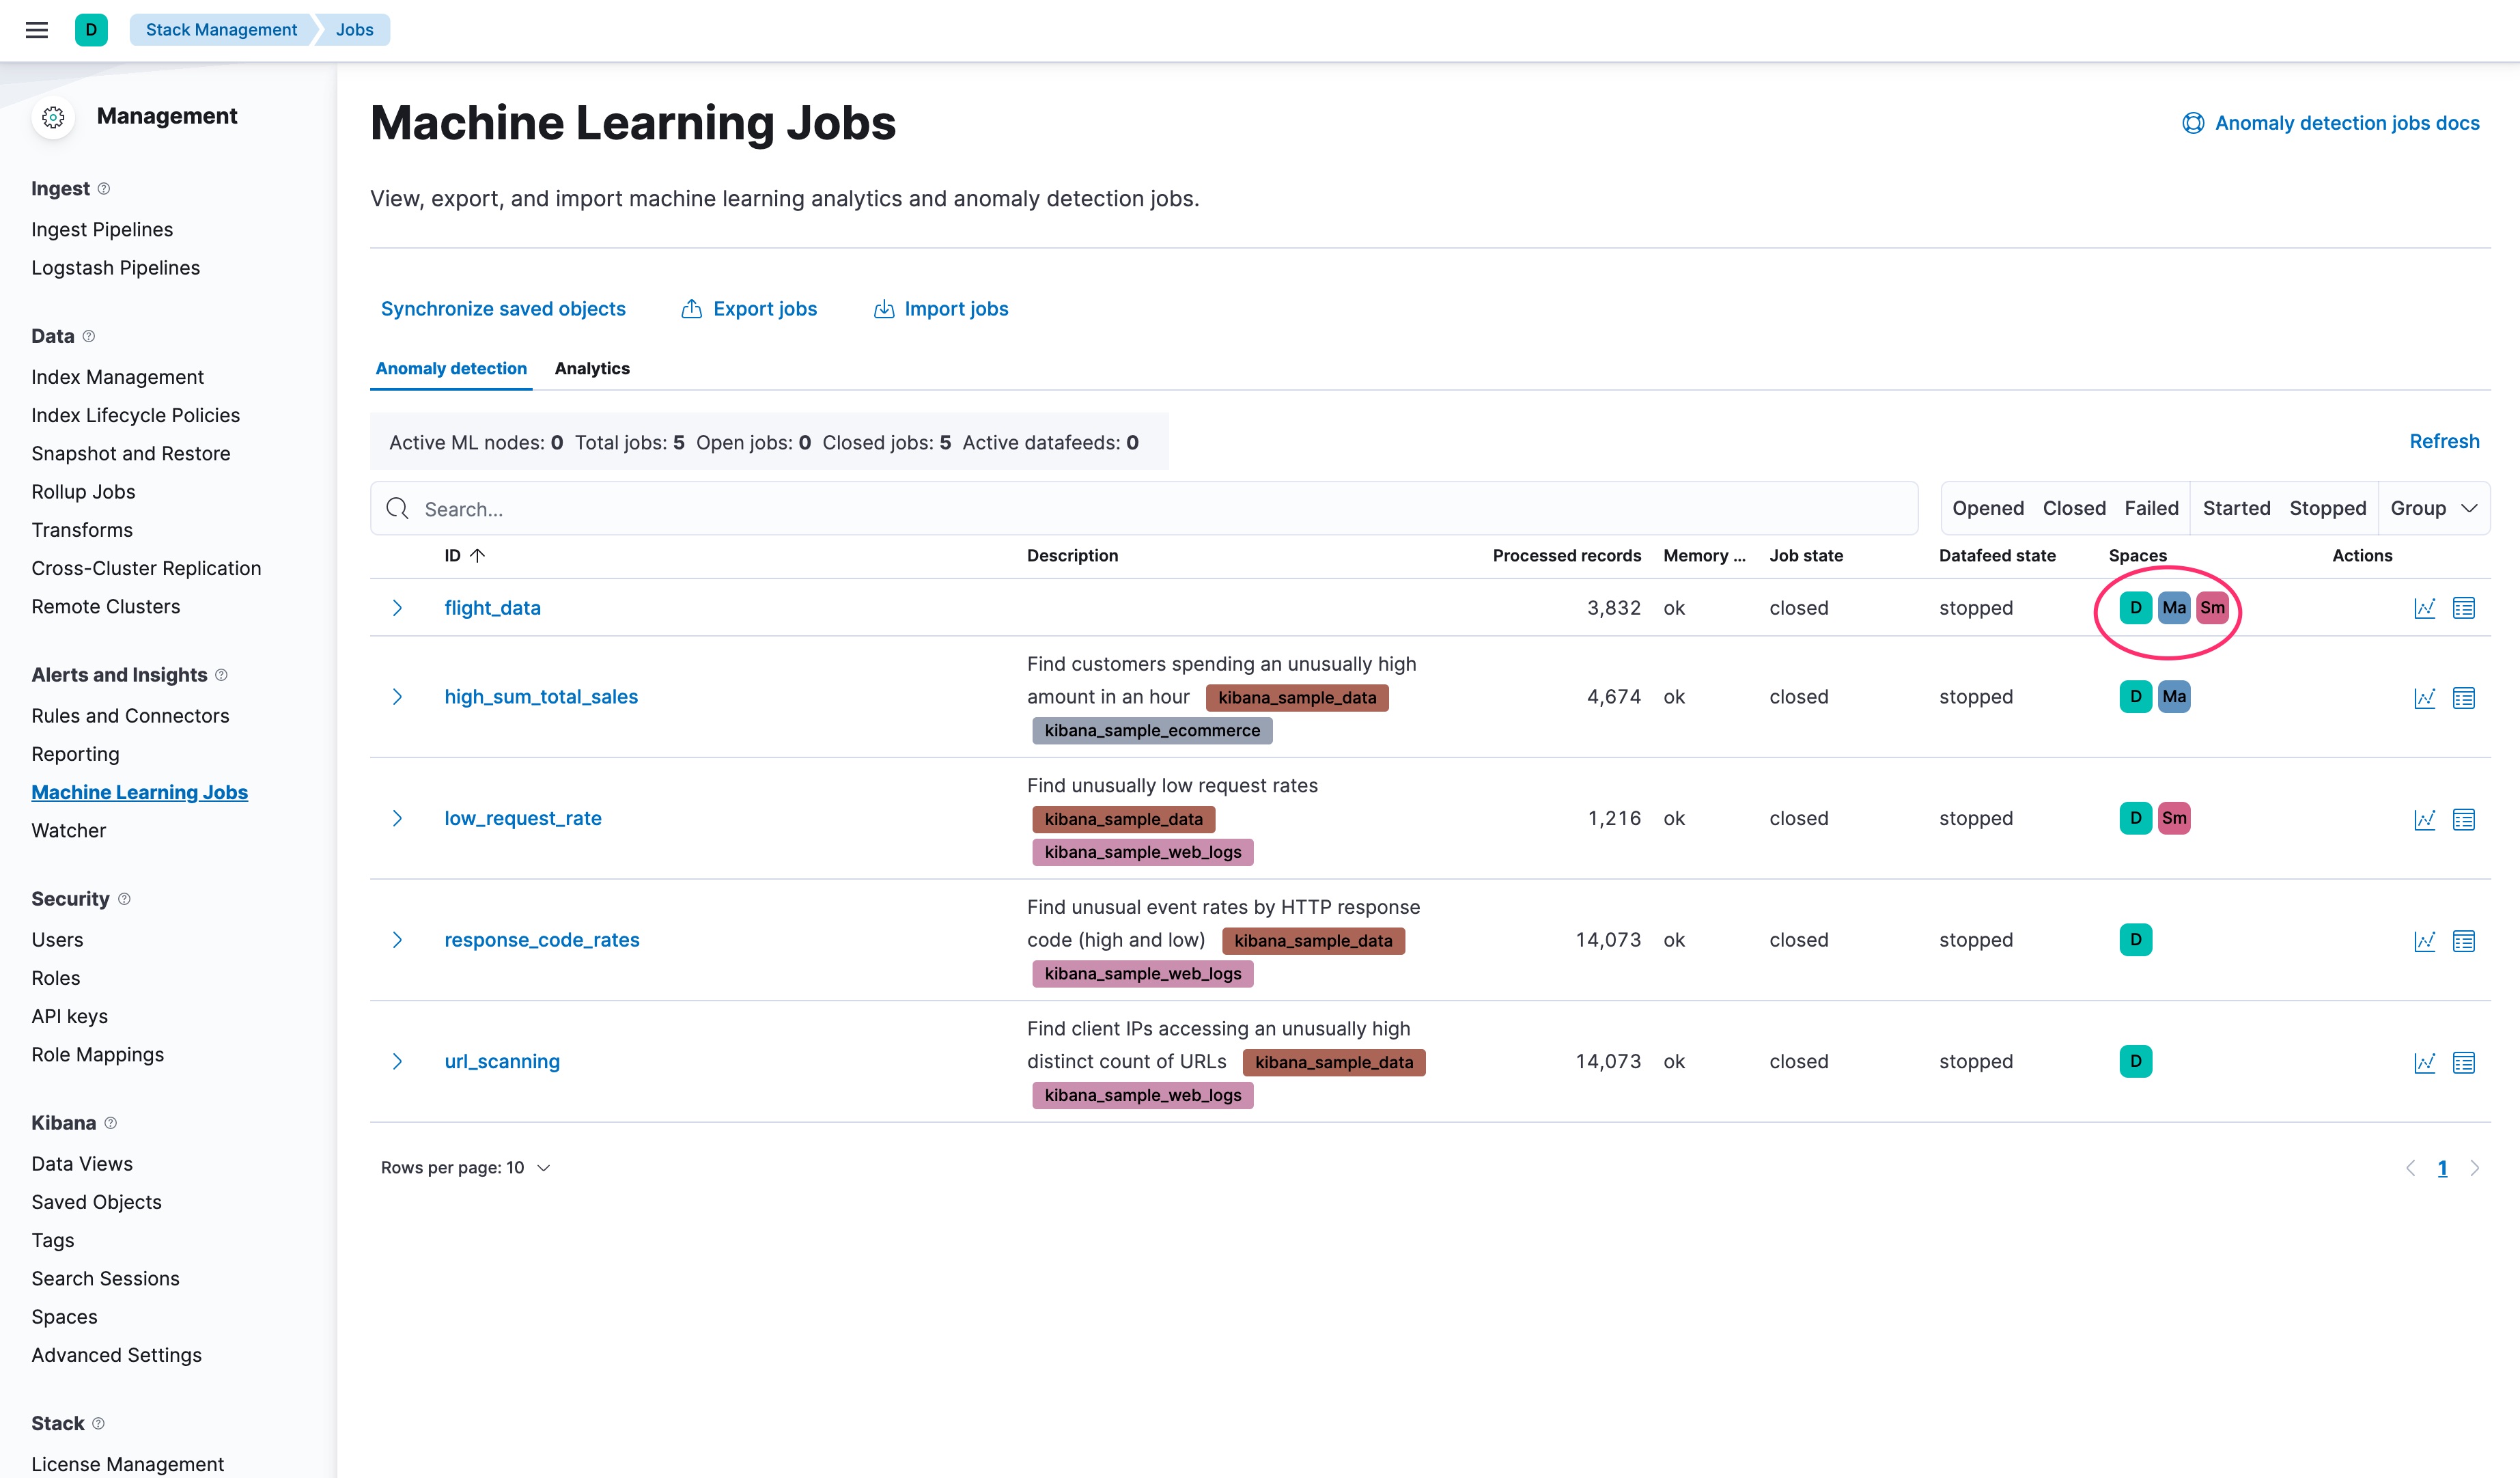 Assign machine learning jobs to spaces